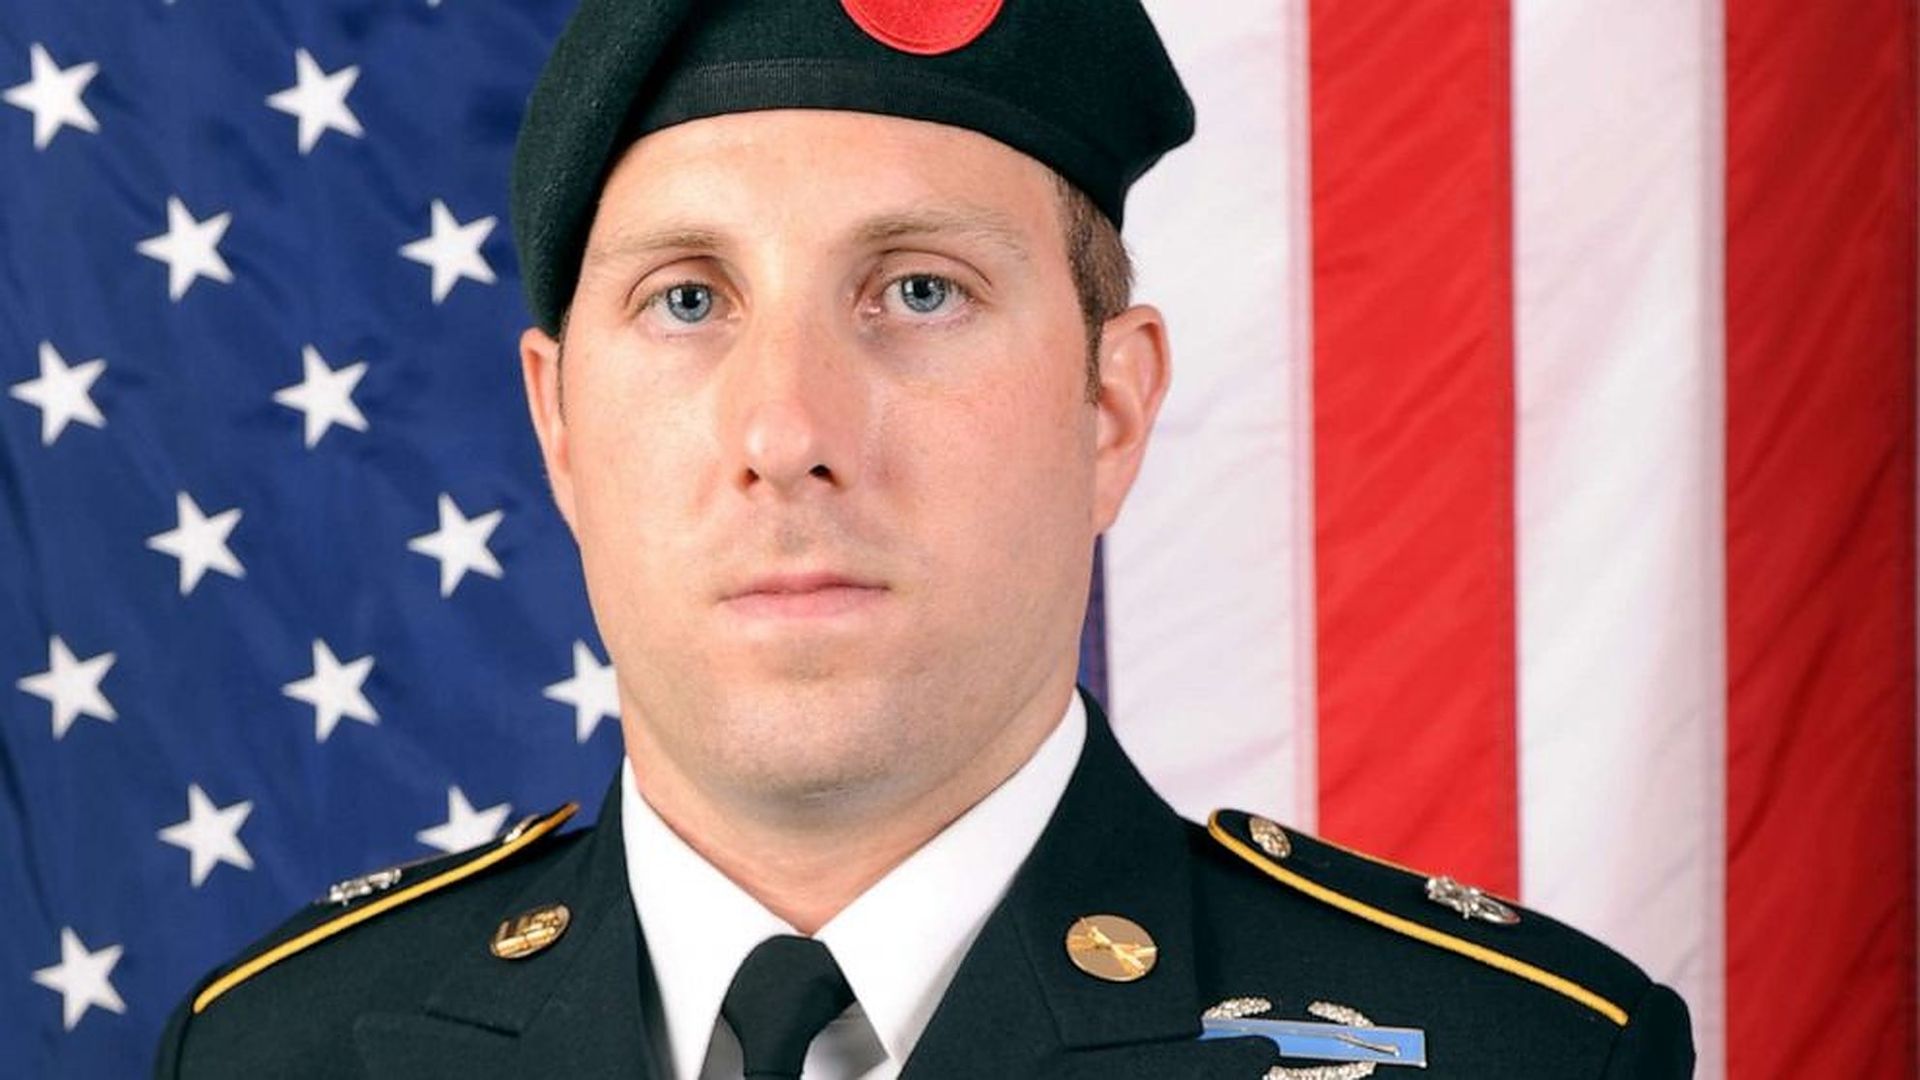 Sgt. 1st Class Michael James Goble, 33, a U.S. Special Forces Soldier, died in Afghanistan, December 23rd 